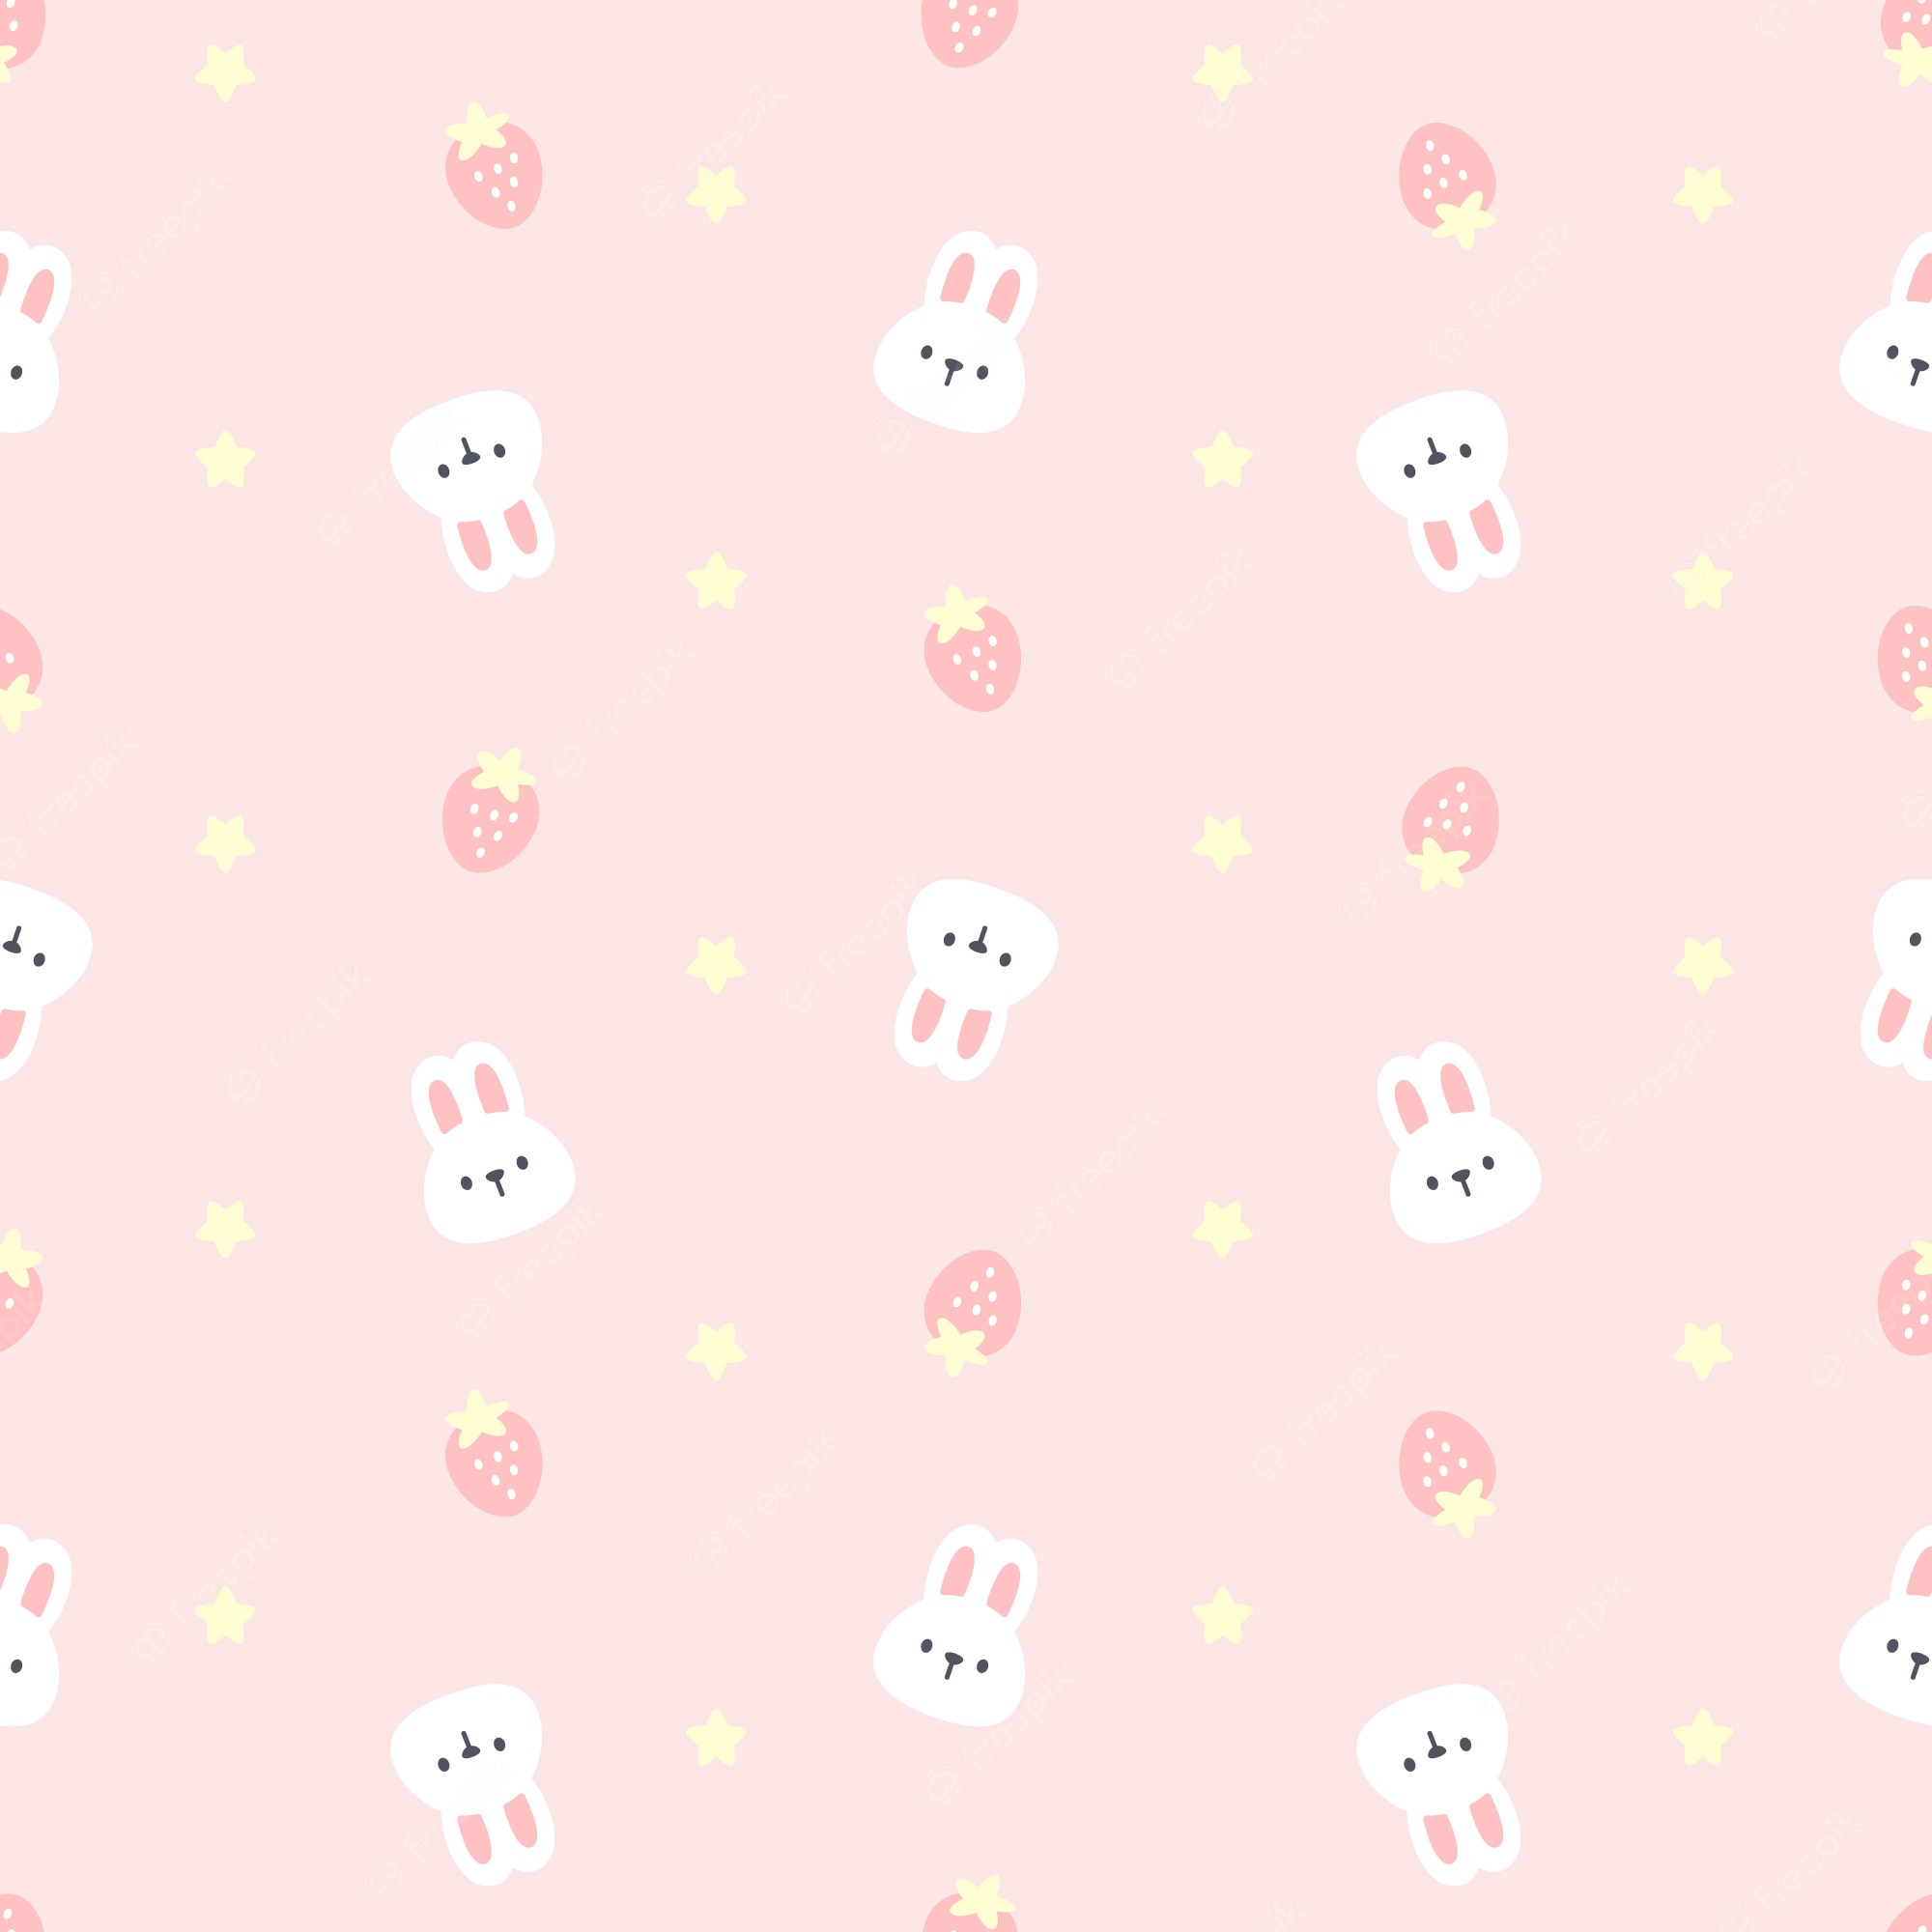 Premium Vector. Cute rabbit and strawberry seamless pattern background